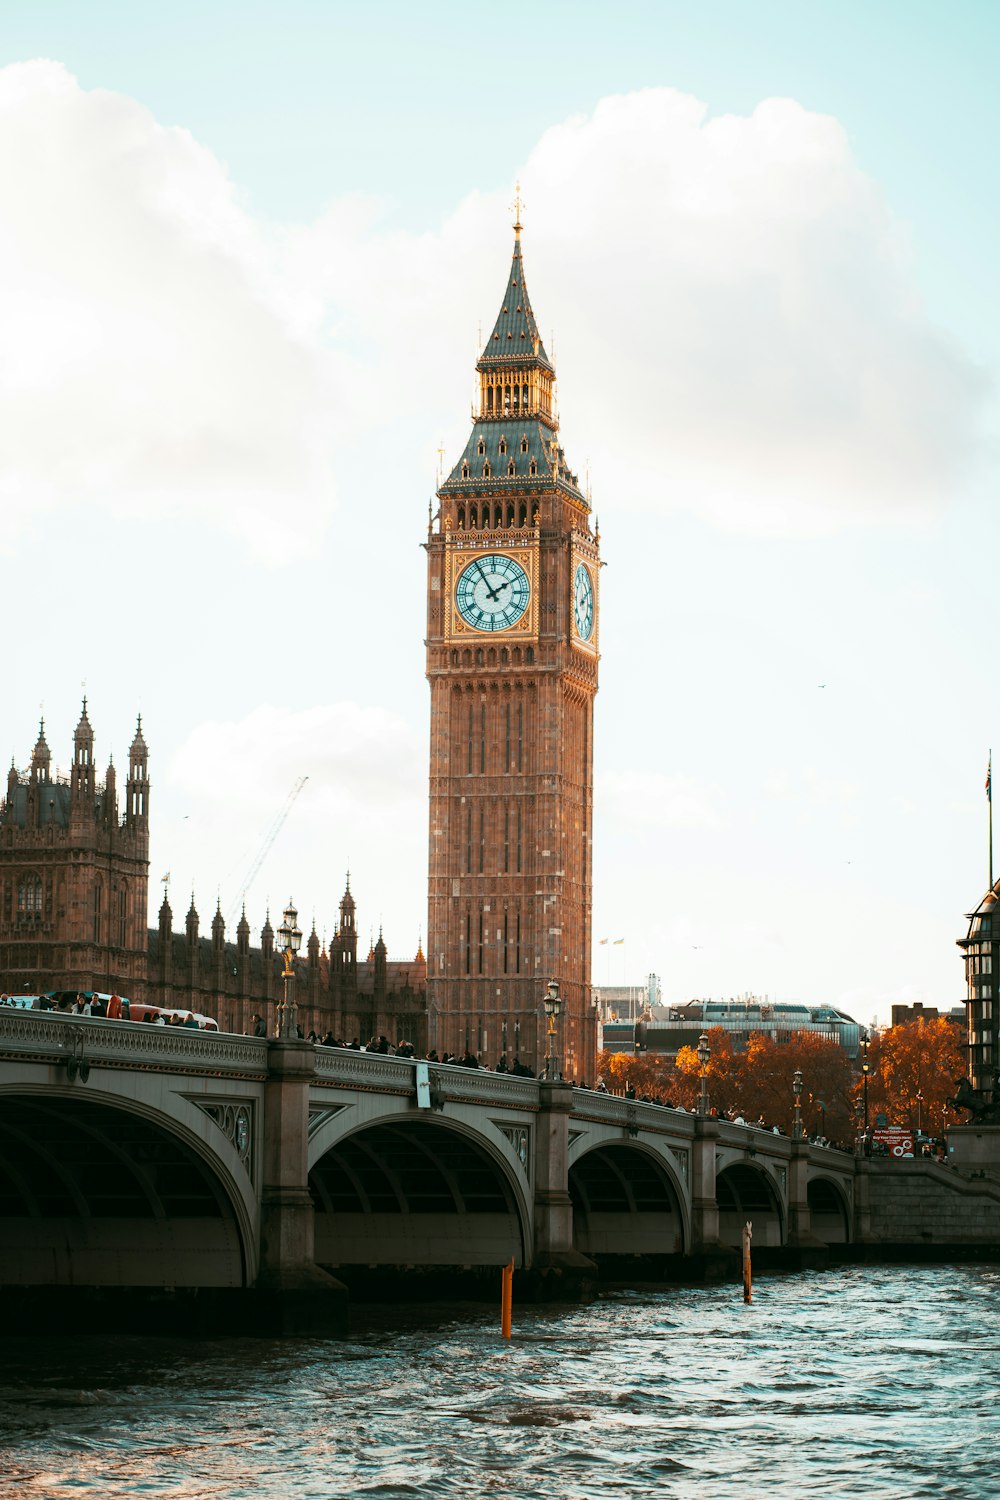 the big ben clock tower towering over the city of london